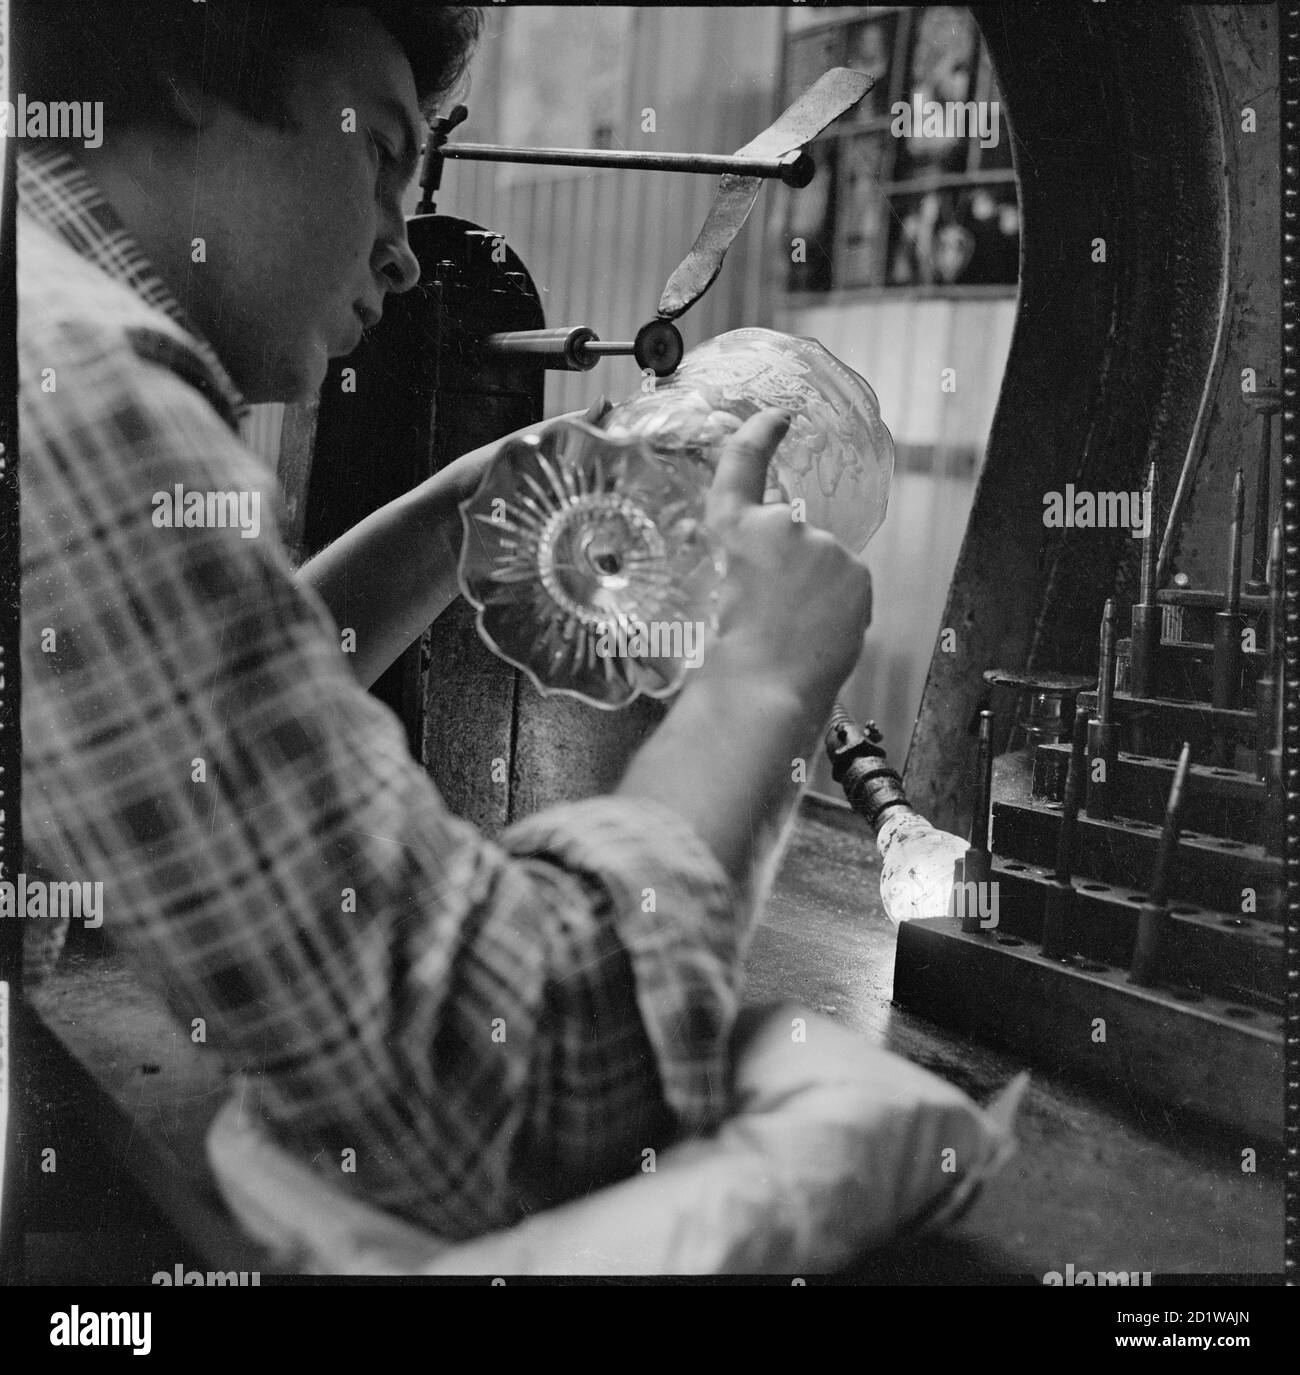 Royal Brierley Crystal, North Street, Brierley Hill, Dudley. A glass cutter at work at the Royal Brierley Crystal Works. Stock Photo